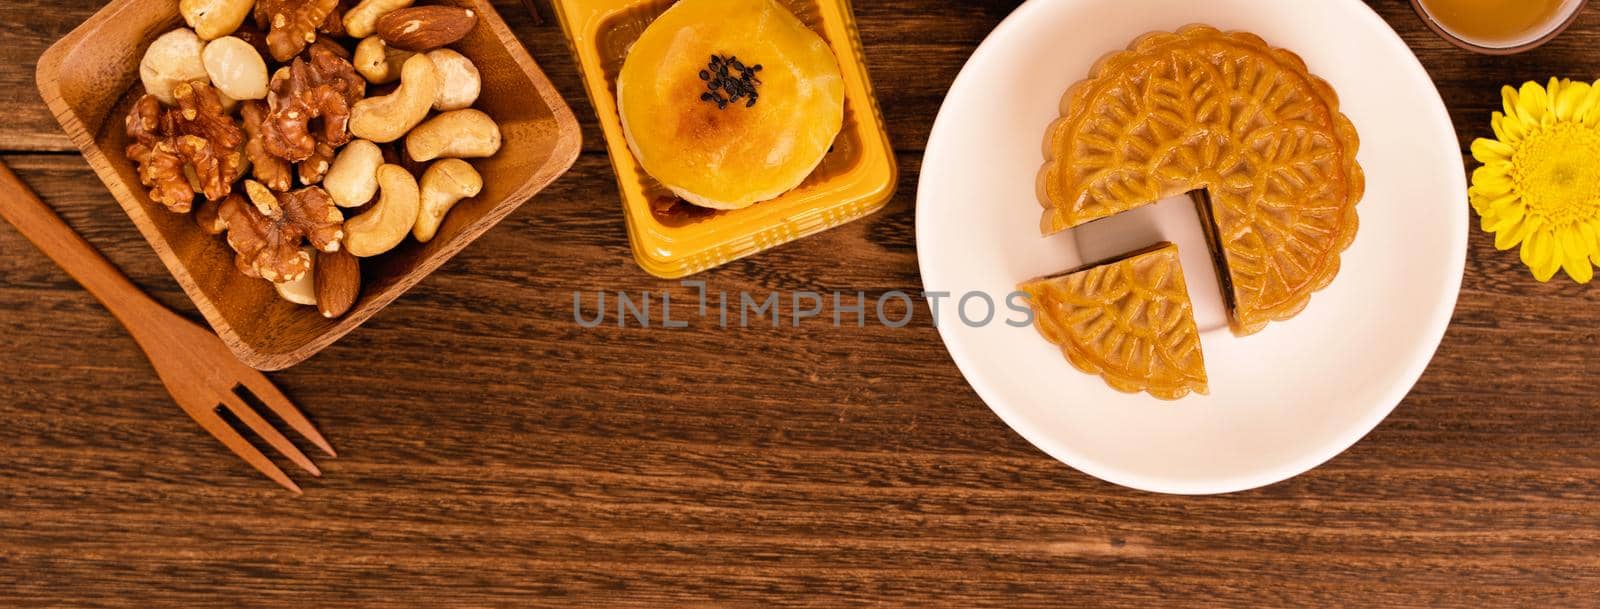 Mid-Autumn Festival holiday concept design of moon cake, mooncakes, tea set on dark wooden table with copy space, top view, flat lay, overhead shot by ROMIXIMAGE